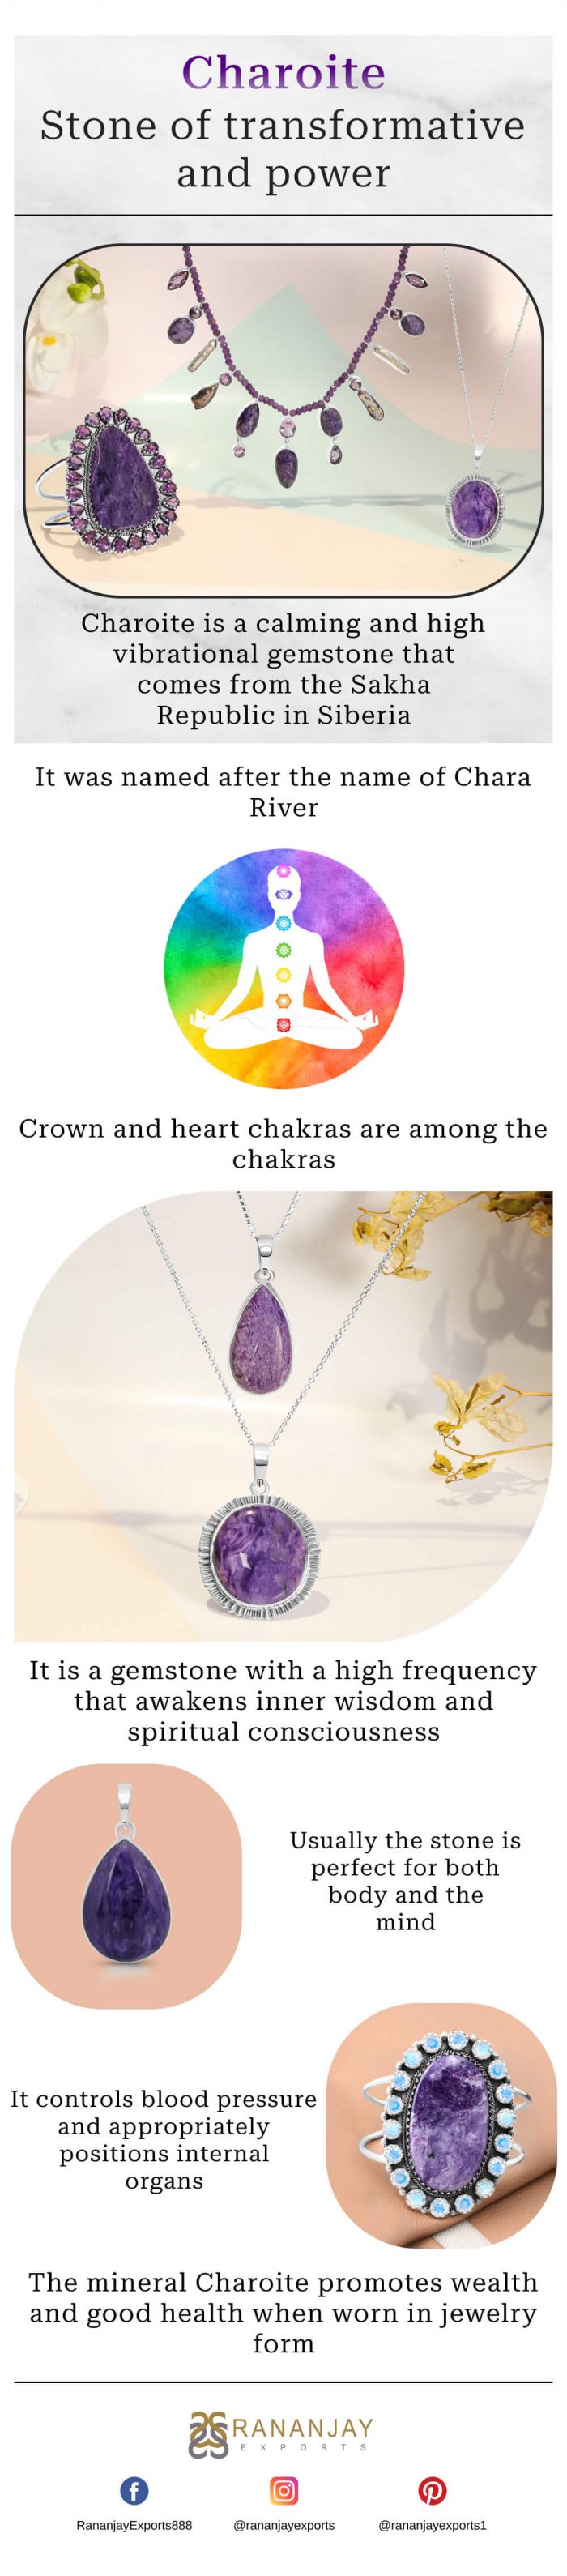 Charoite – Stone of transformative and power